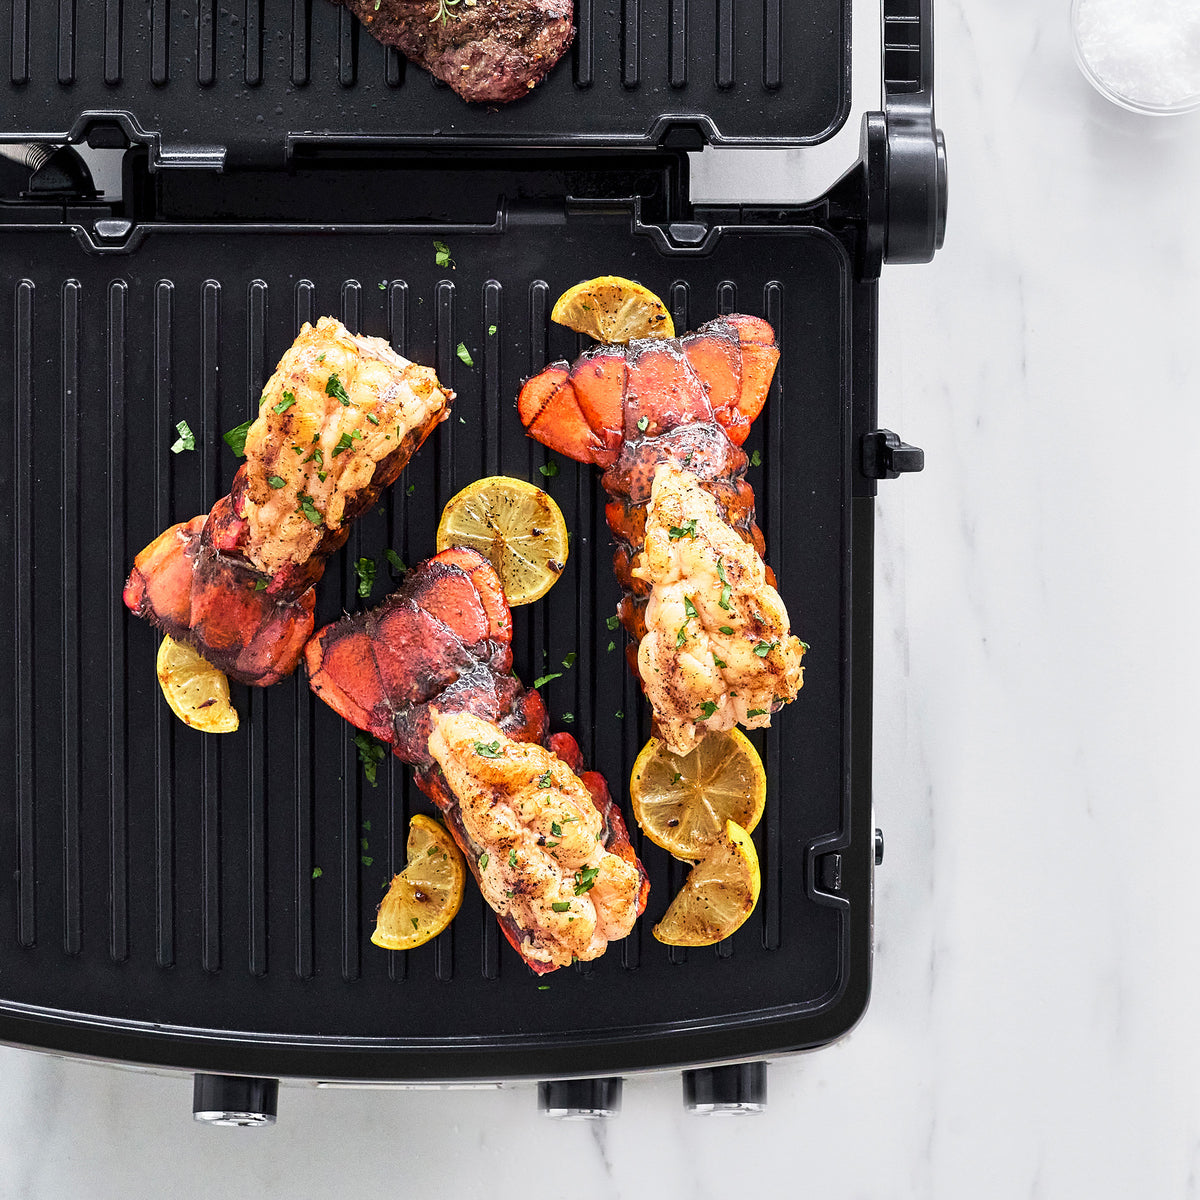 Cuisinart Griddler Elite Vs Breville Smart Grill: Which is Best Choice?, 3  Forty Grill in 2023